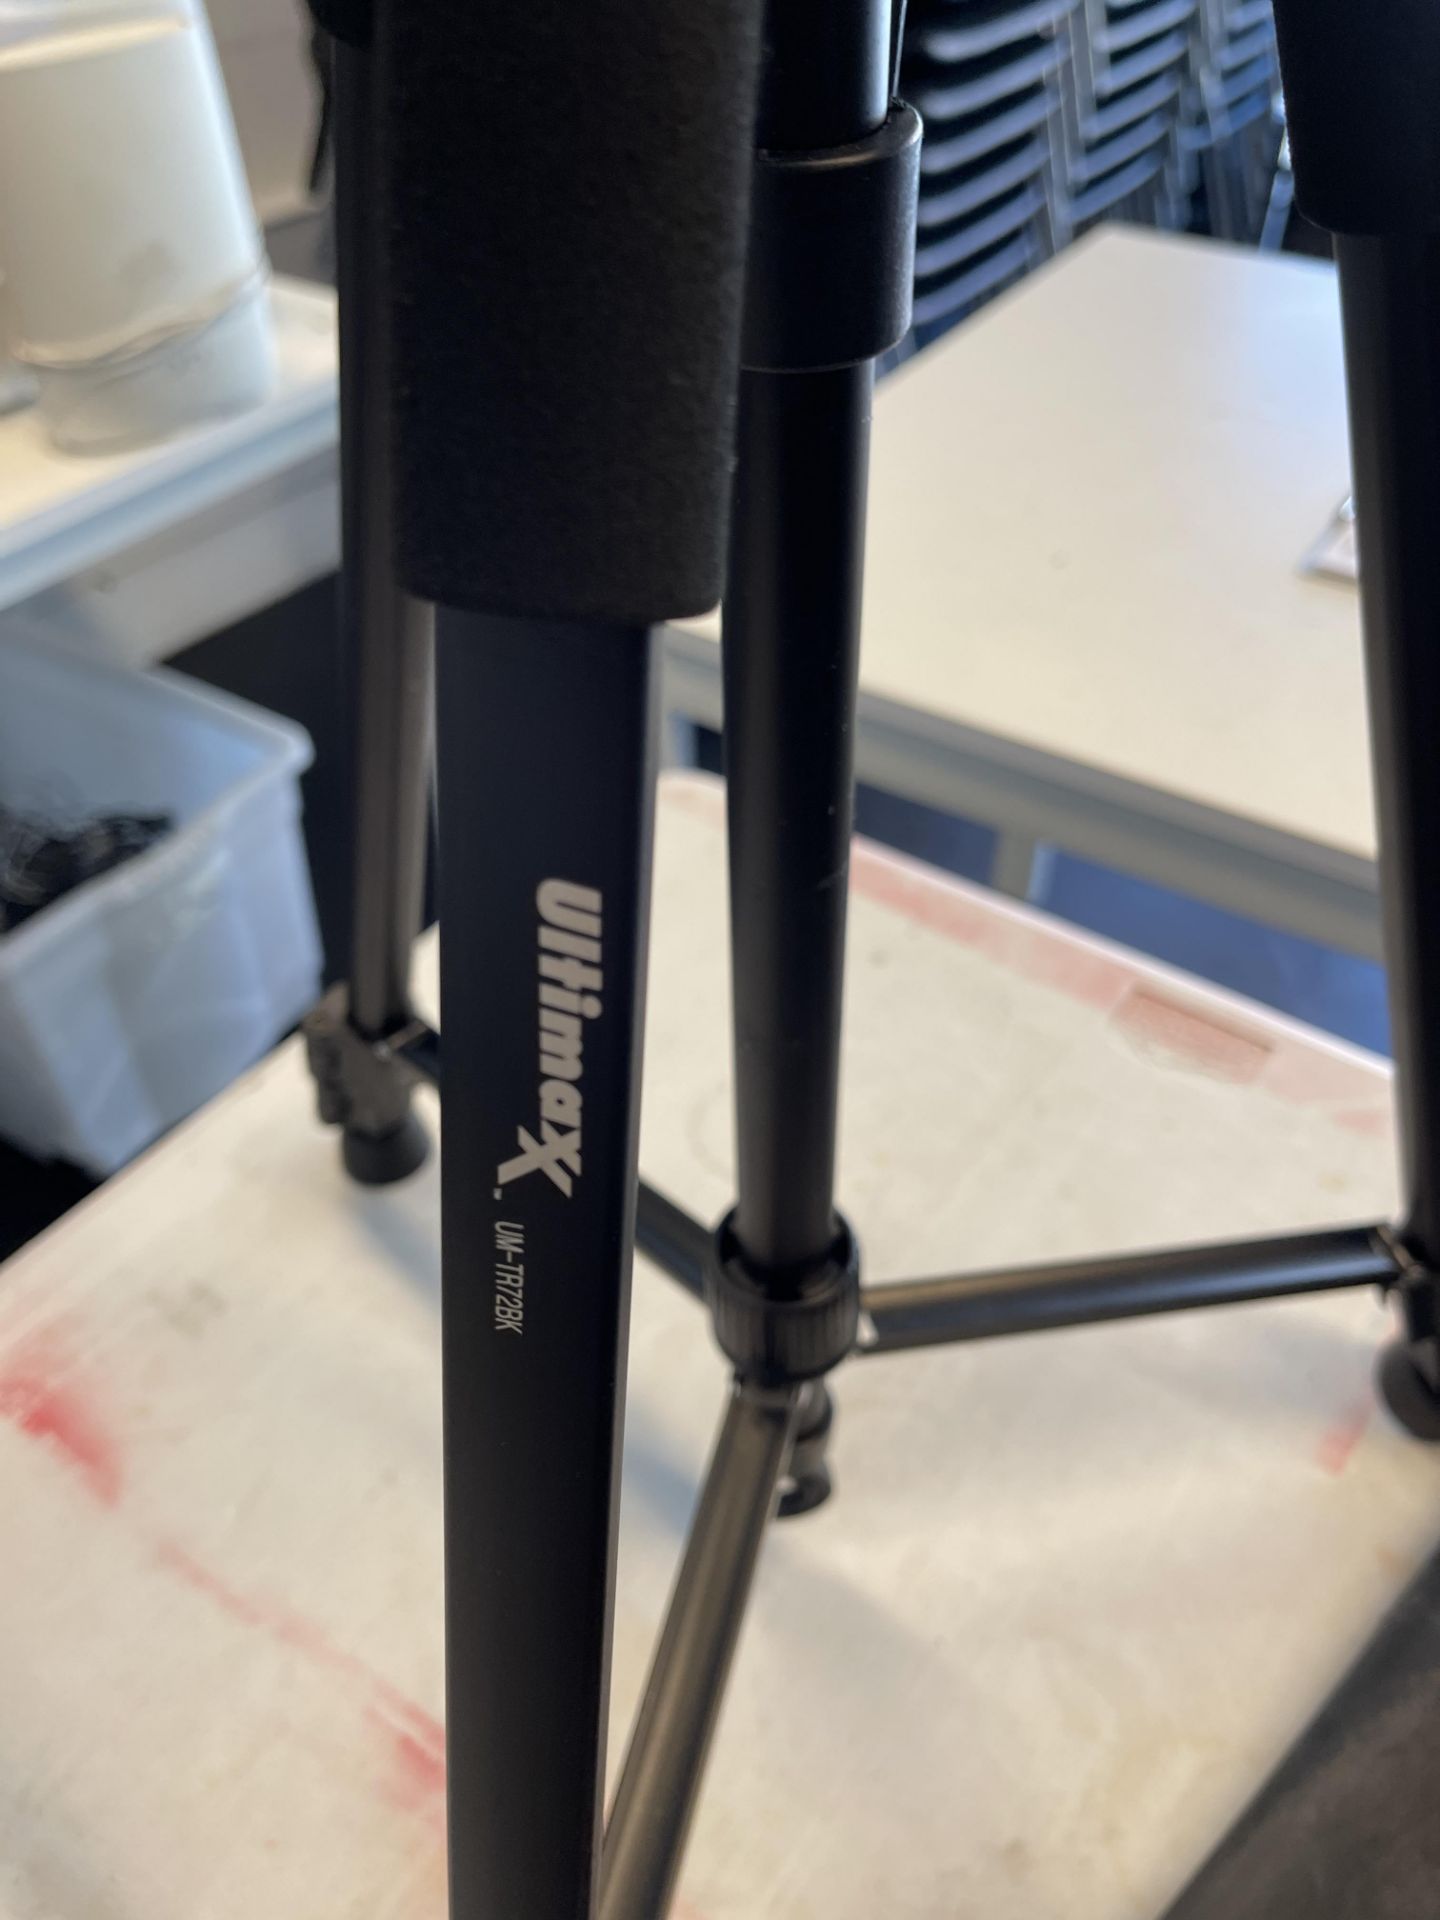 Ultimaxx UM-TR72Bk Tripod with Case - Image 3 of 4